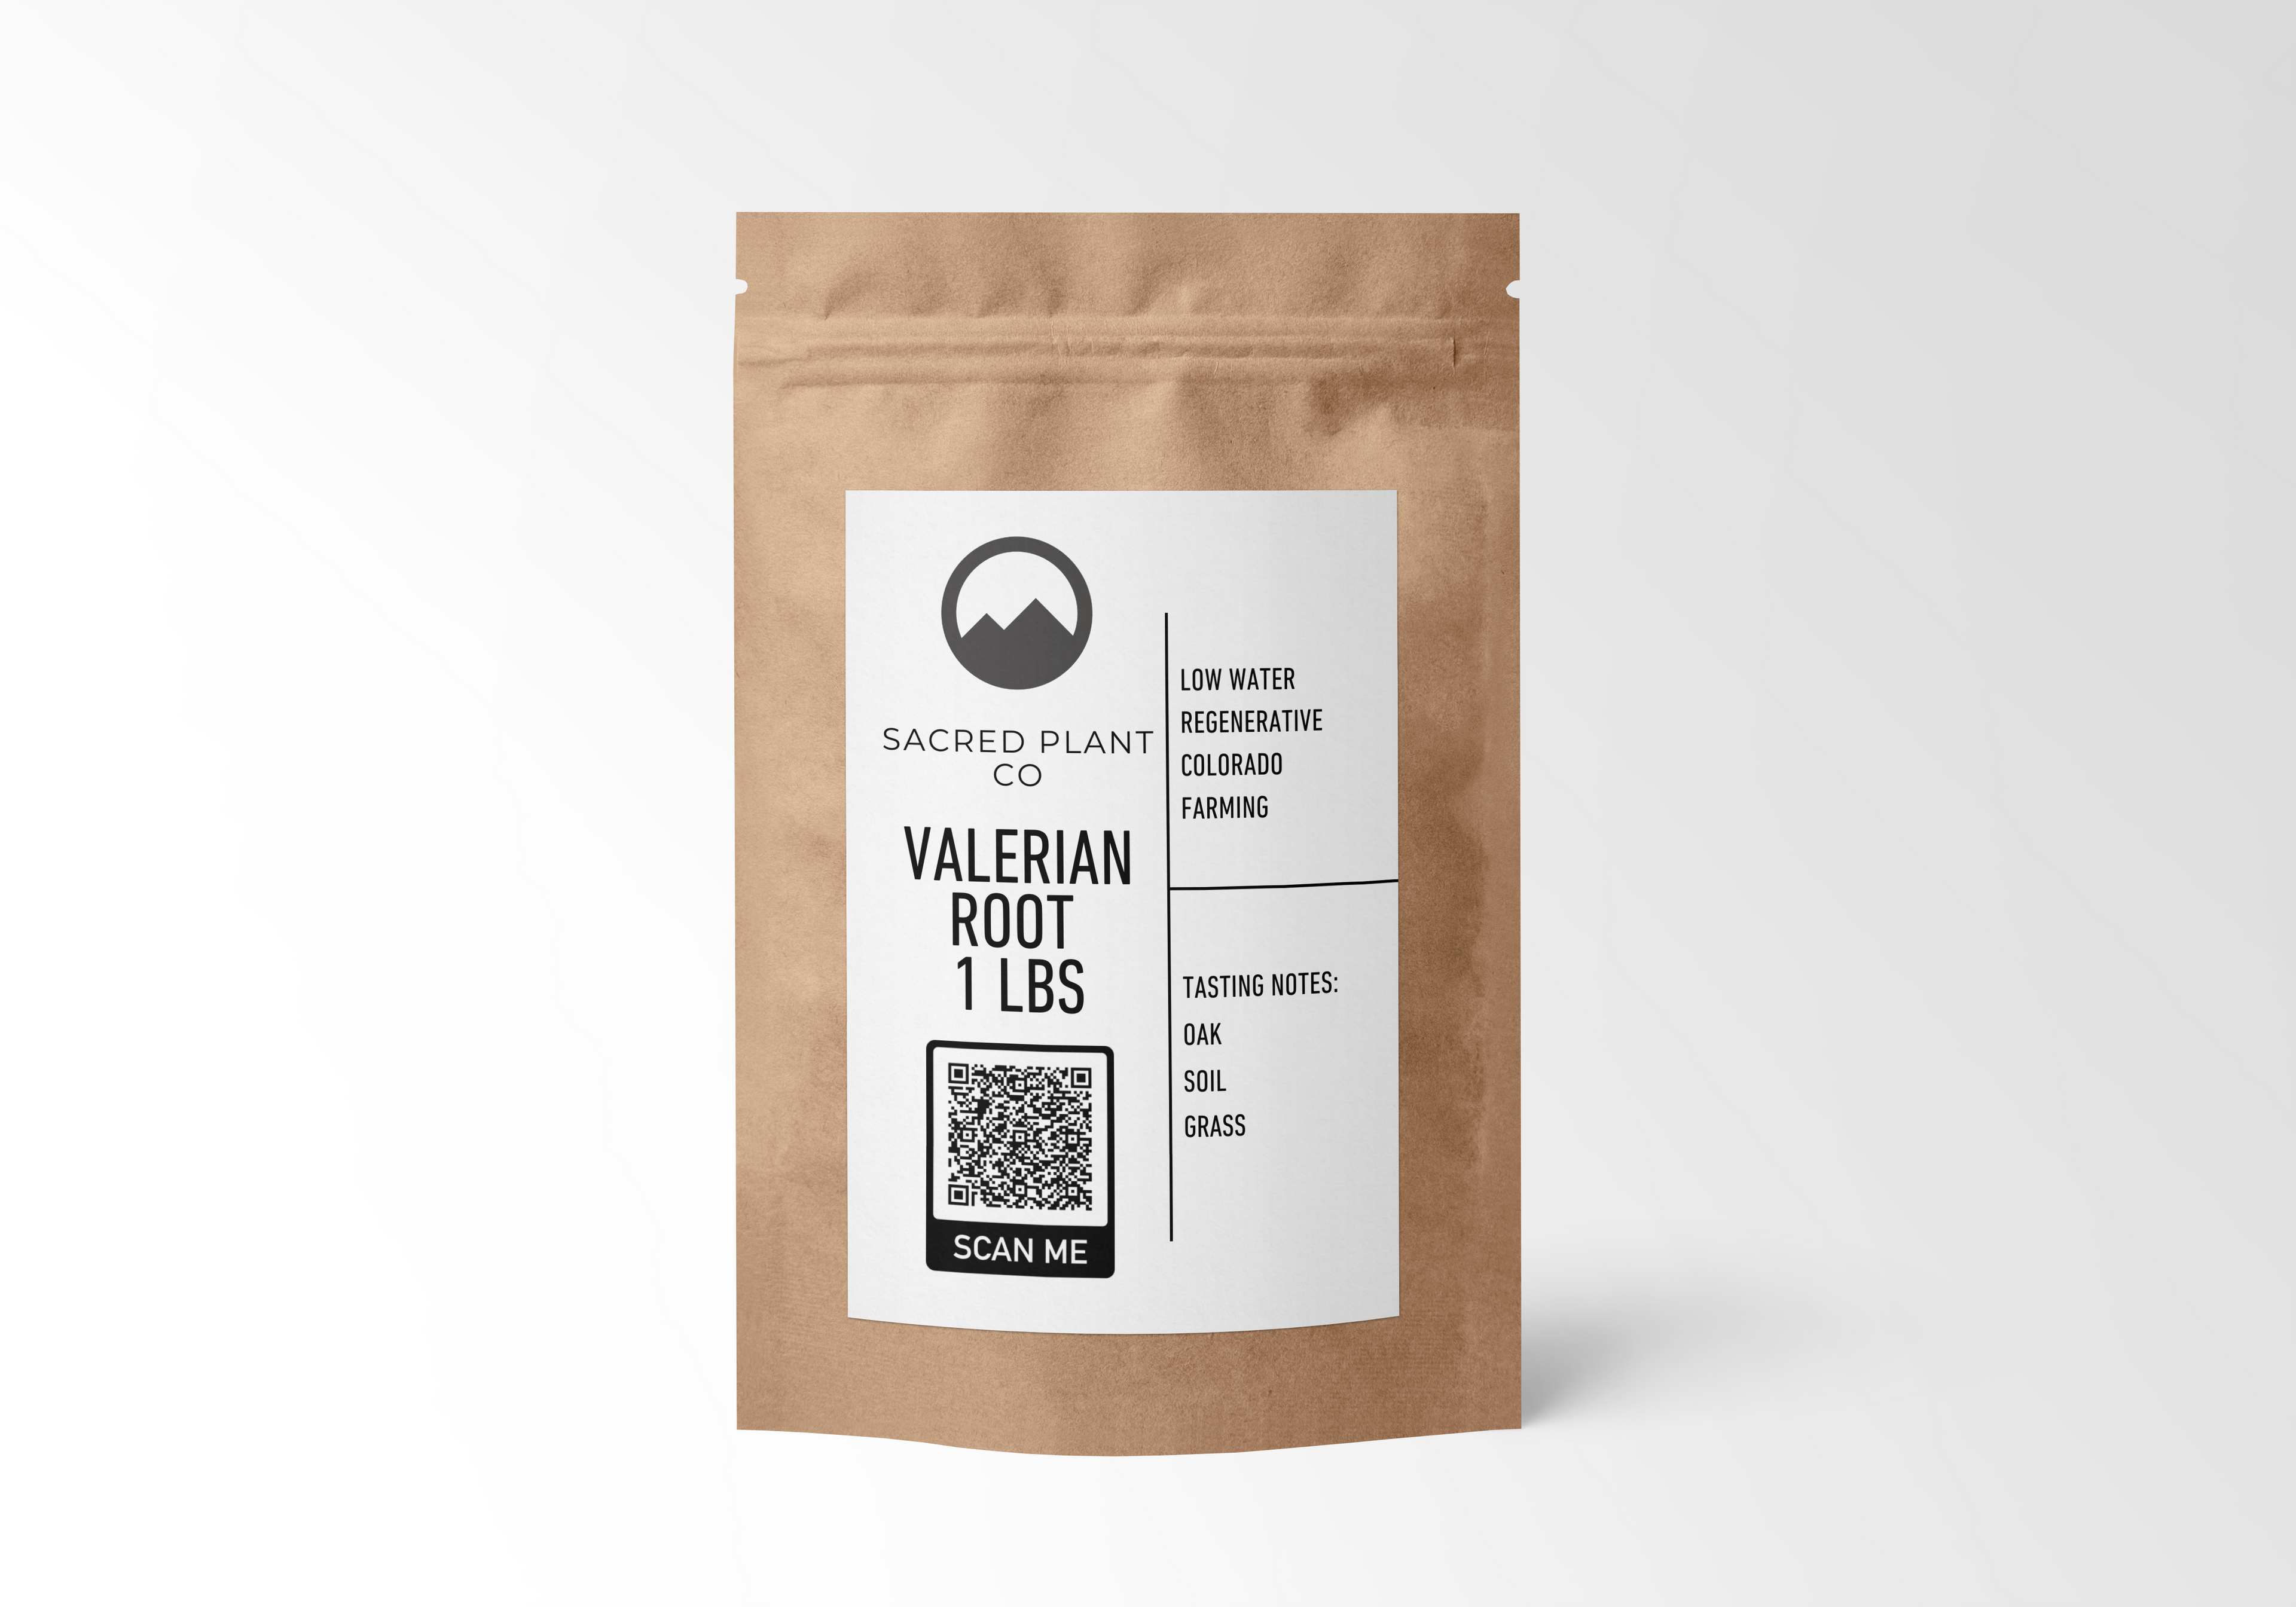 Sacred Plant Co Valerian Root in 1 LBS Bag